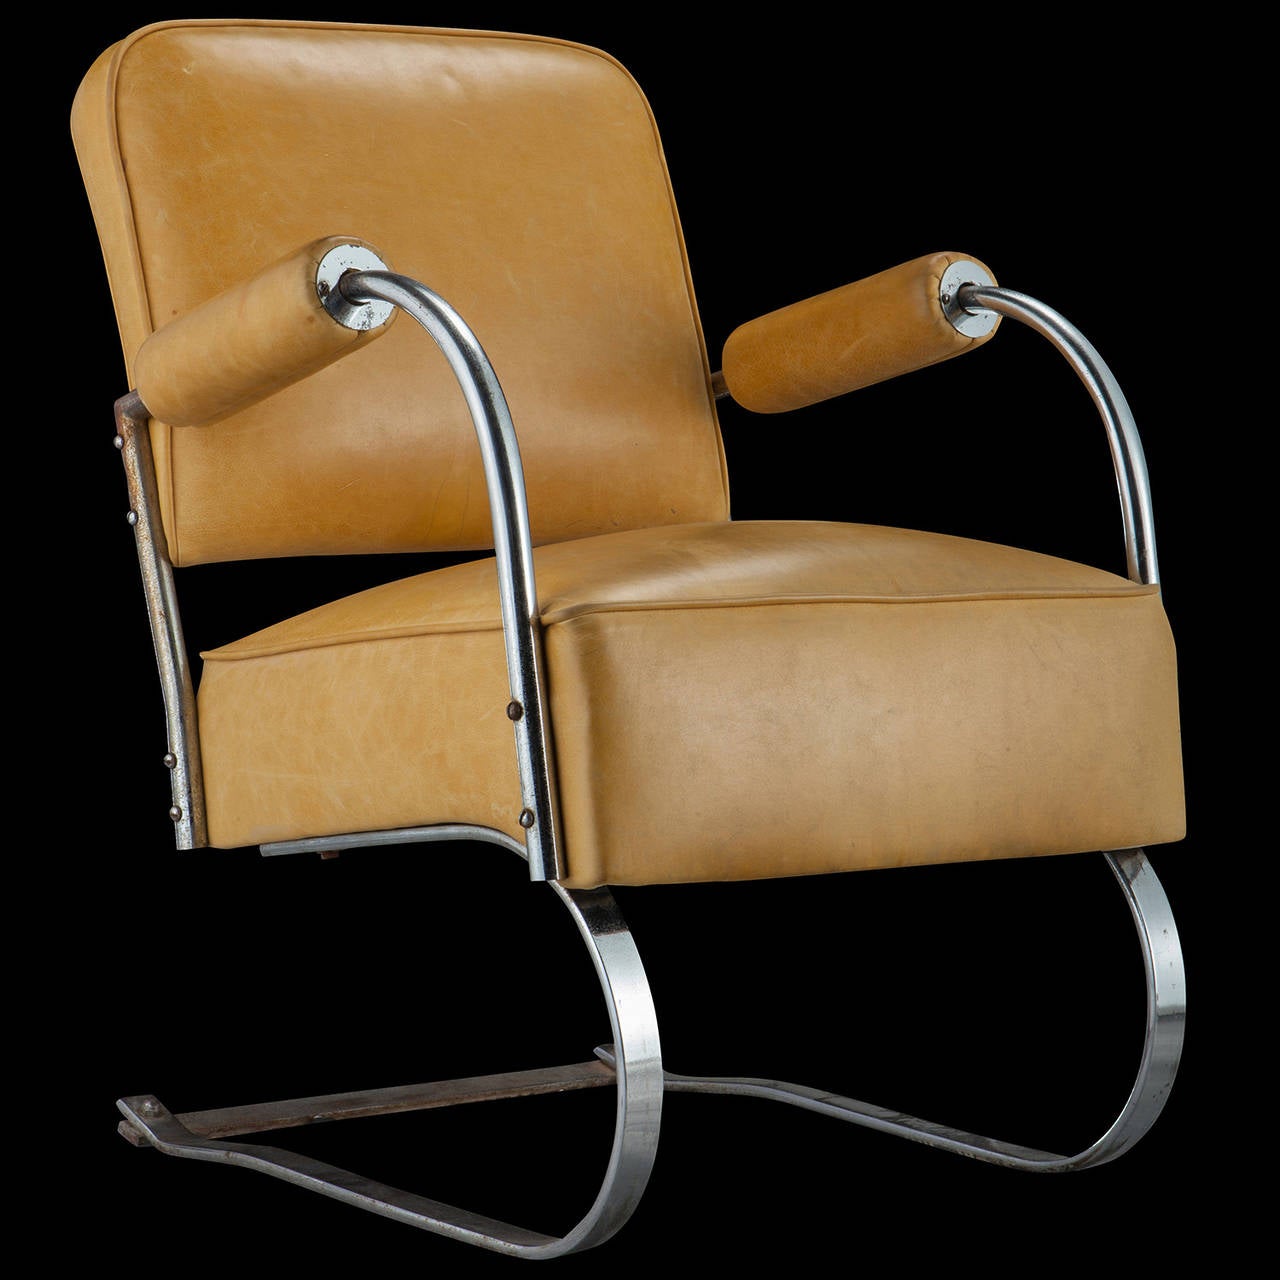 Steel cantilever frame with original leather upholstery.